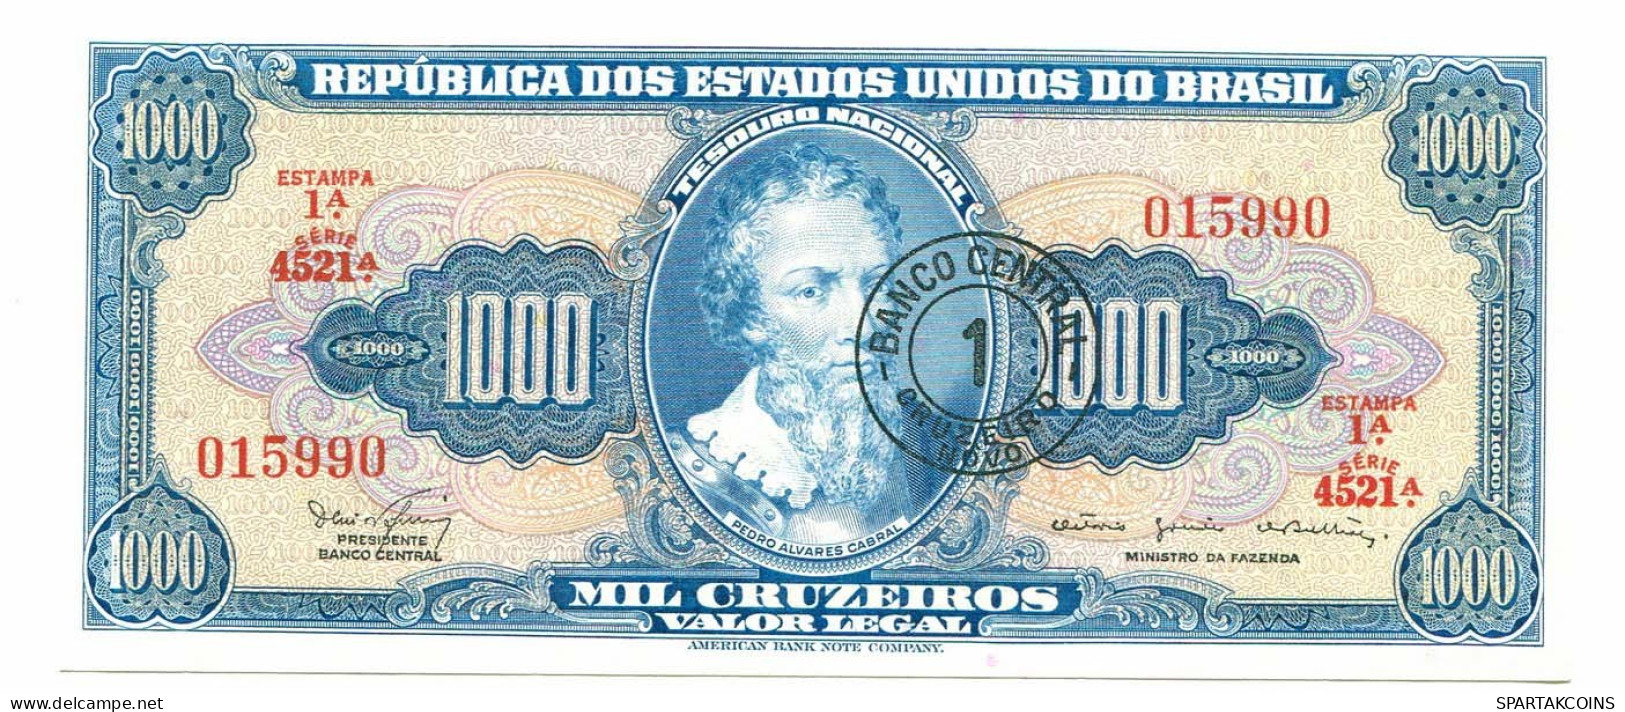 BRASIL 1000 CRUZEIROS 1963 SERIE 4521A UNC Paper Money Banknote #P10869.4 - [11] Local Banknote Issues